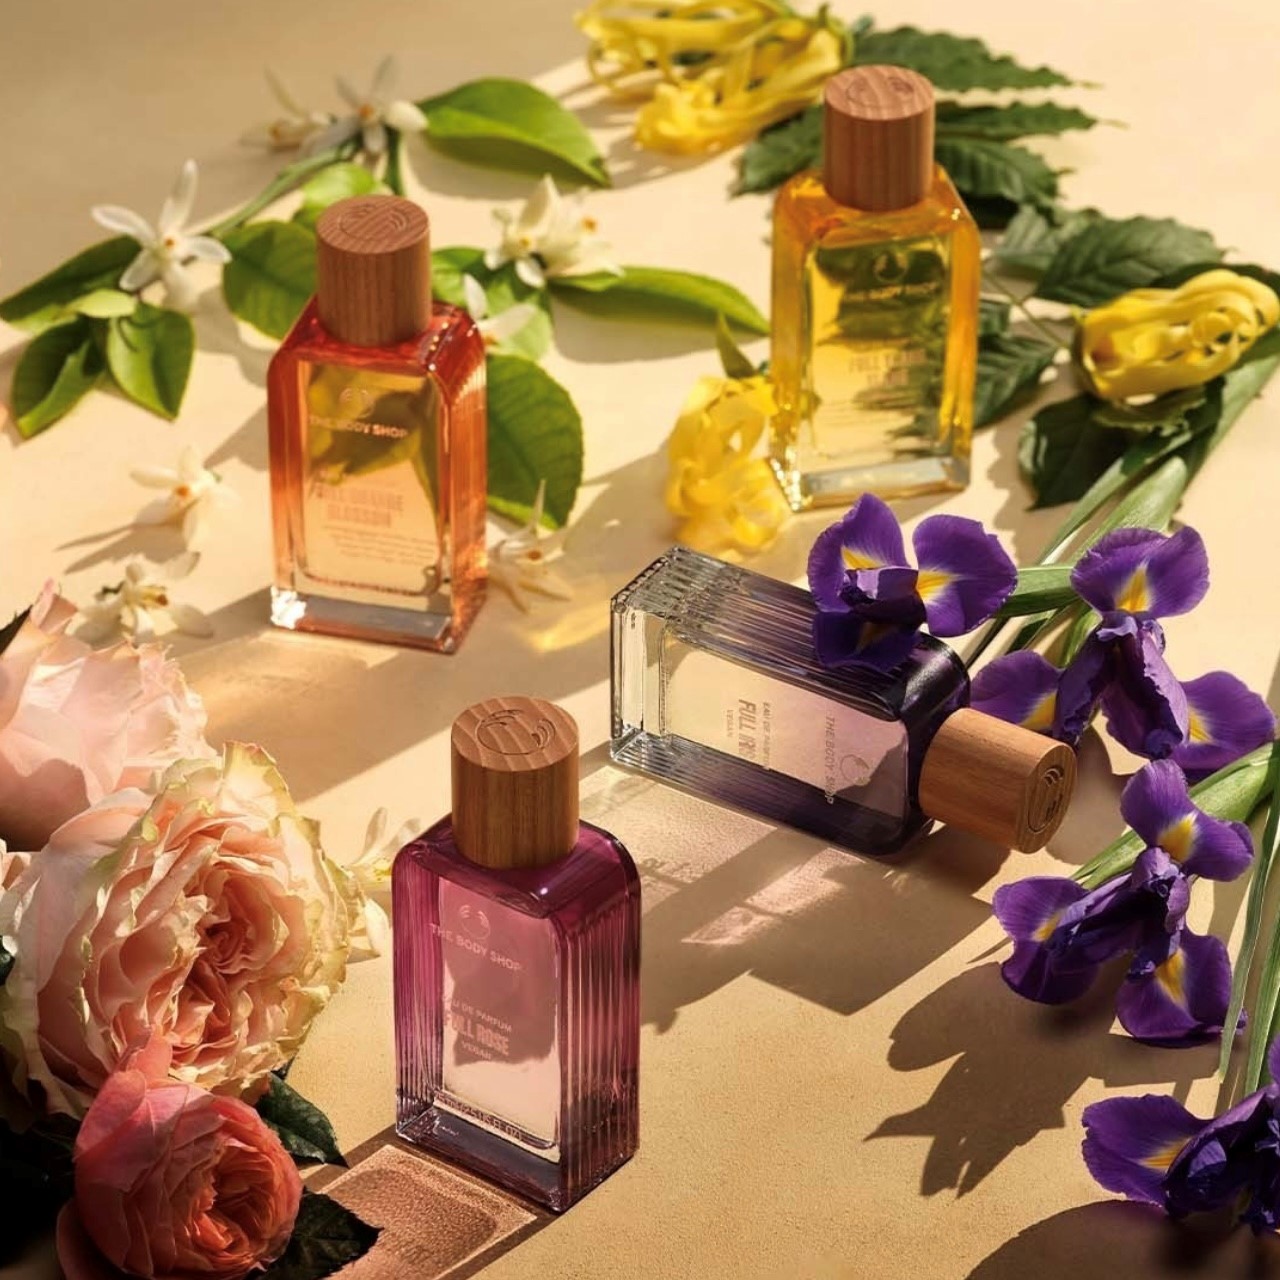 Spring perfume options from The Body Shop